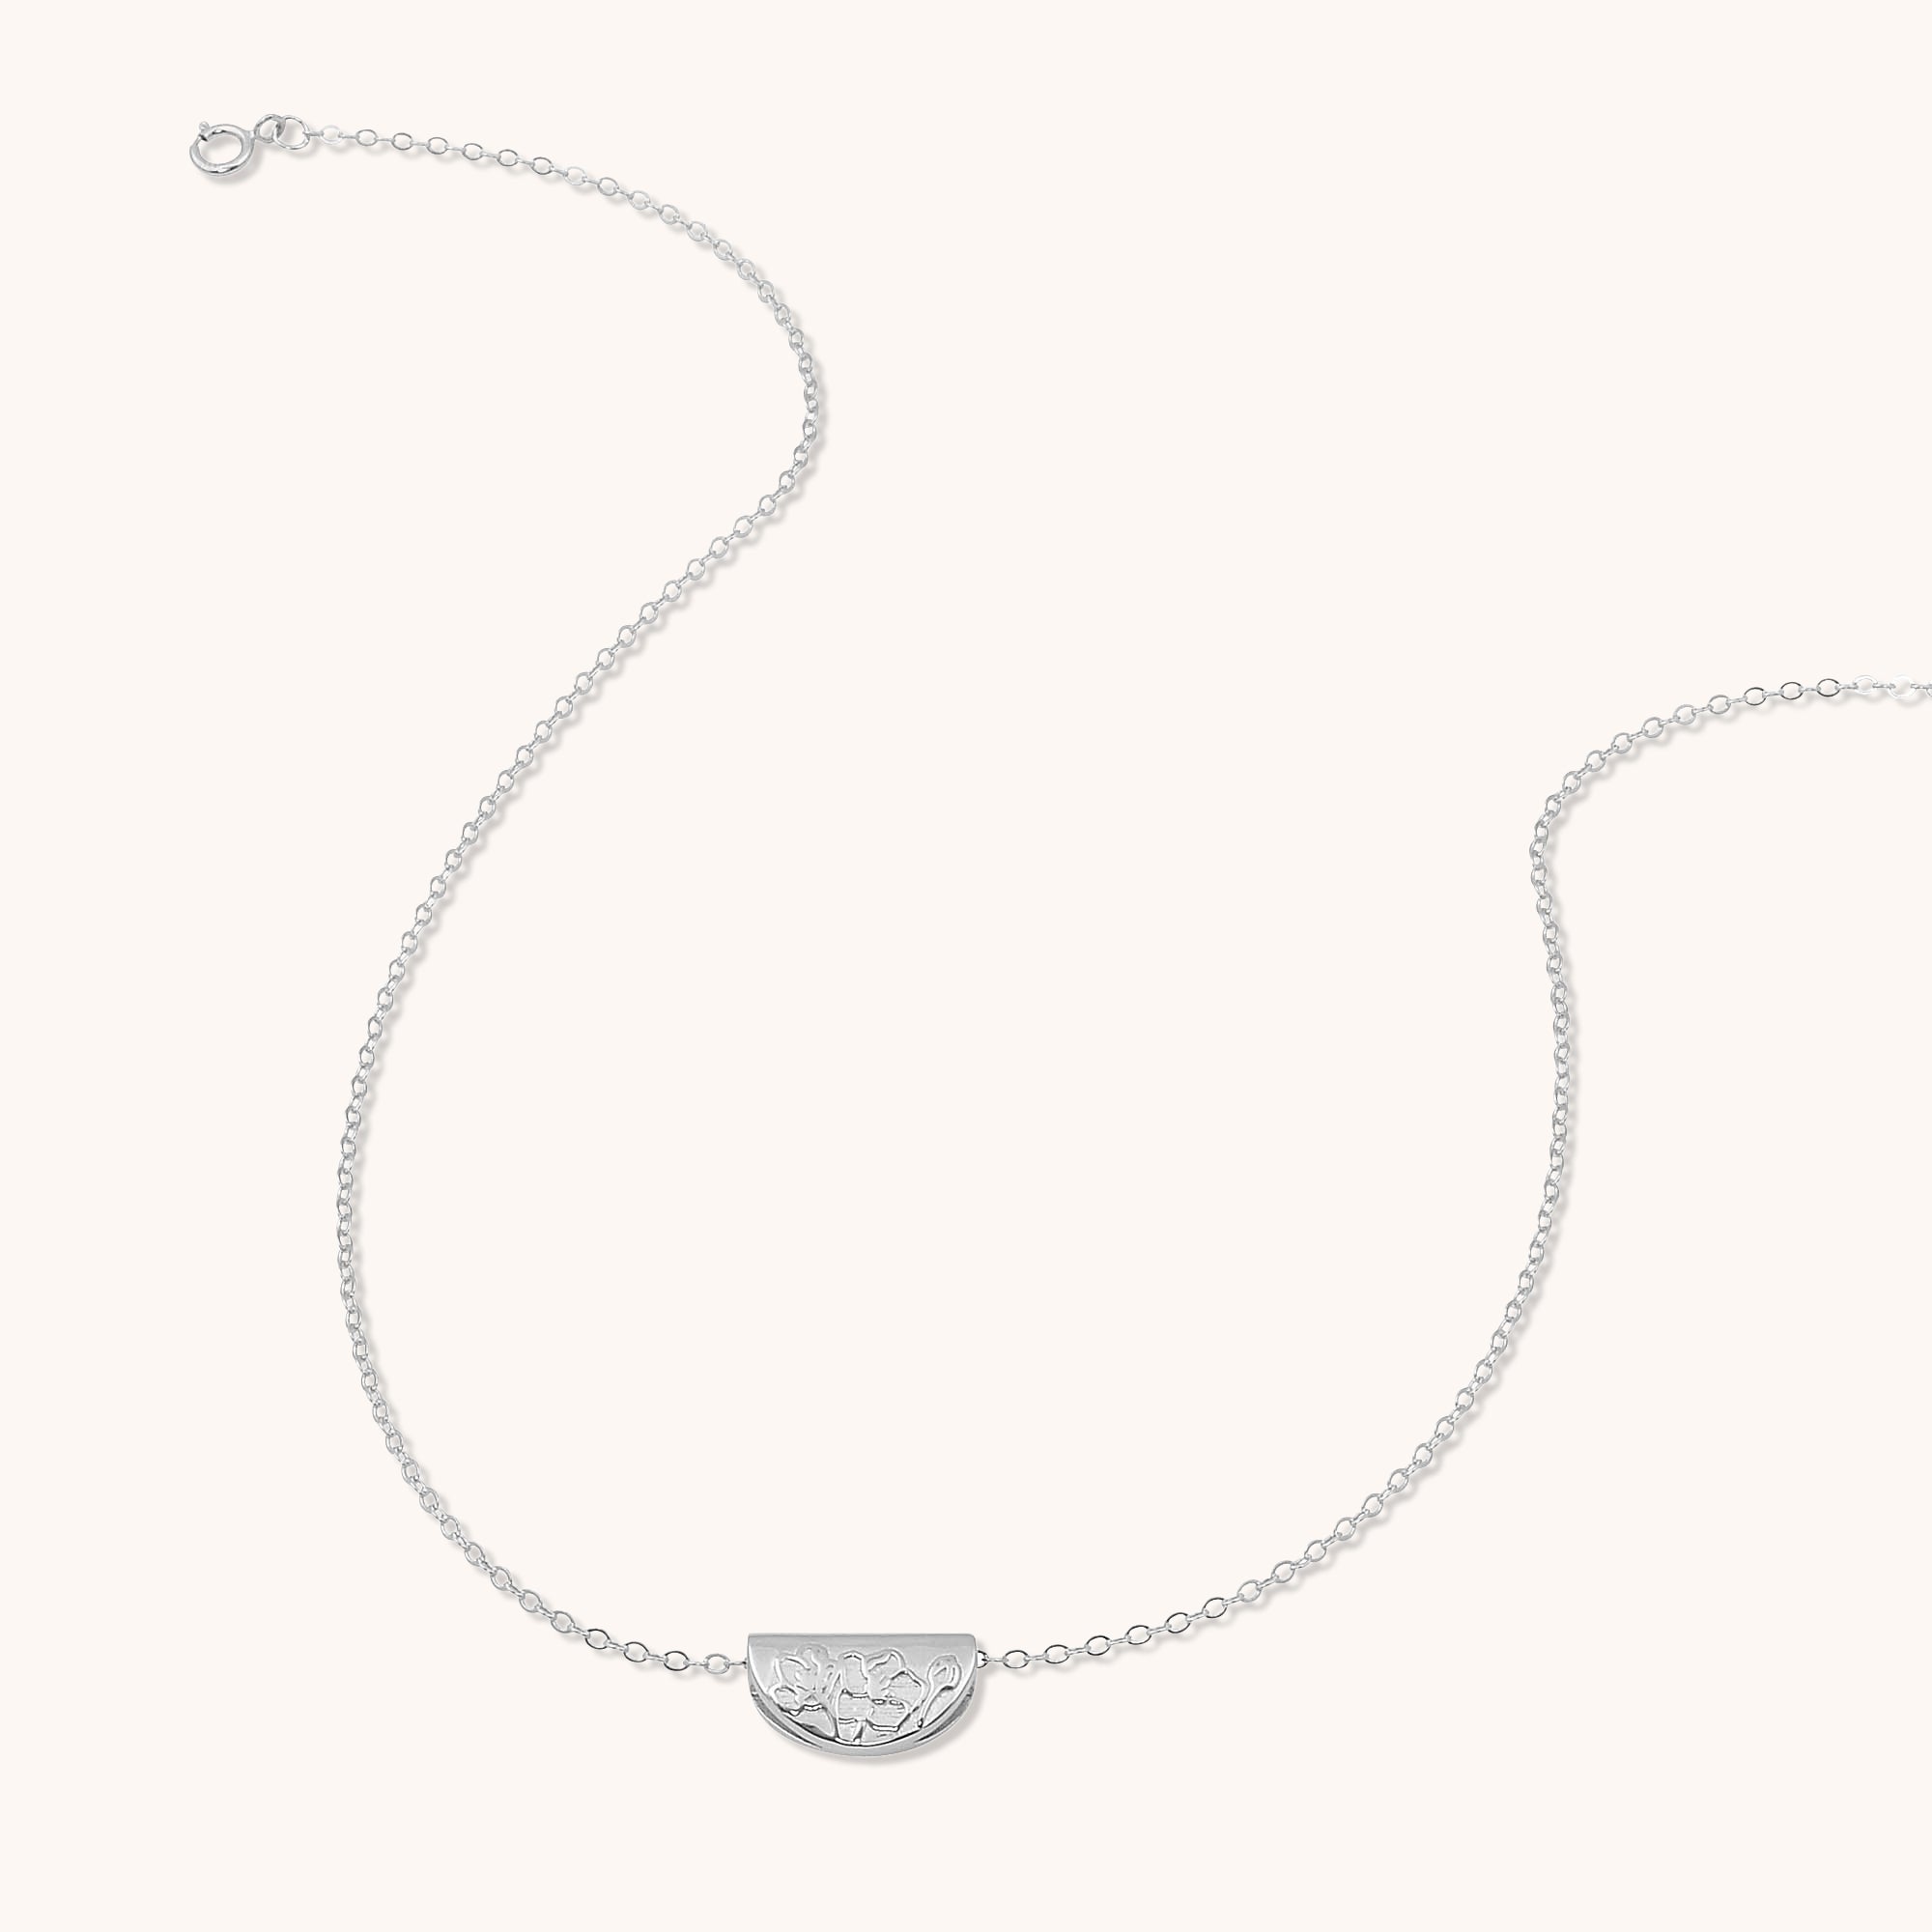 Birth Flower Necklace May (Hawthorn) Silver